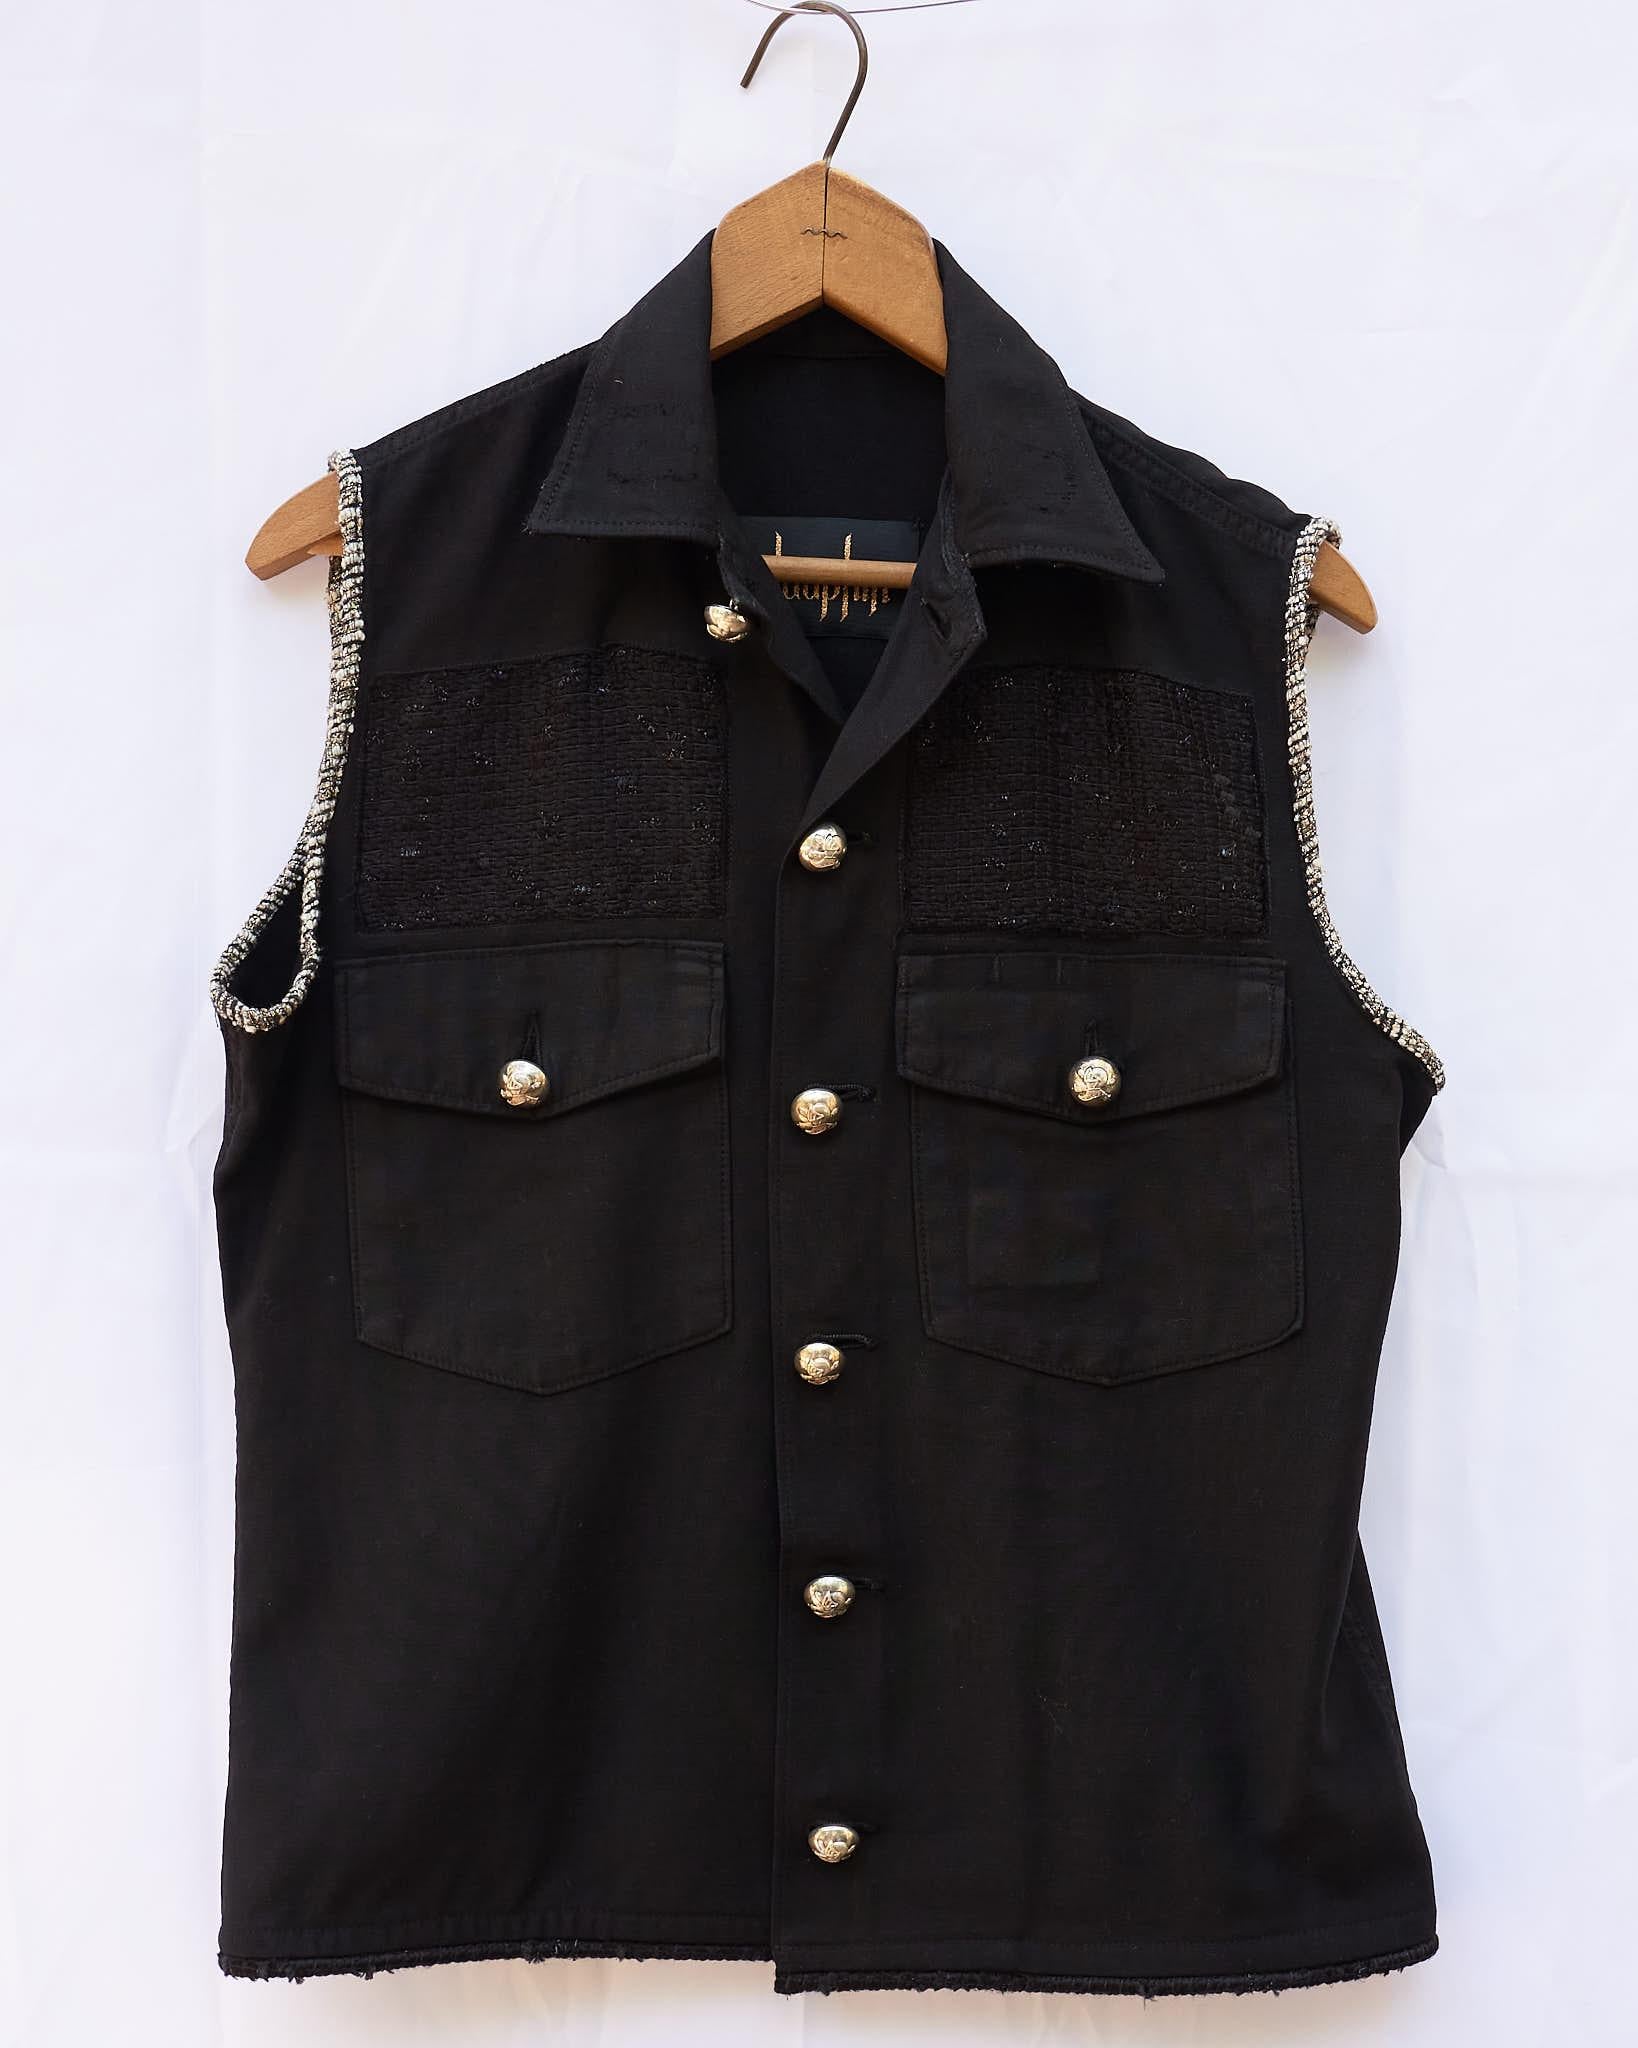 Embellished Black Sleeveless Vintage Military Jacket Repurposed into a Vest with Lurex Tweed In Black and Gold Lurex Bindings,  Vintage Collectible Military Vintage Silver tone Buttons in Brass.

This is a One of a kind Jacket, Fully Sustainable